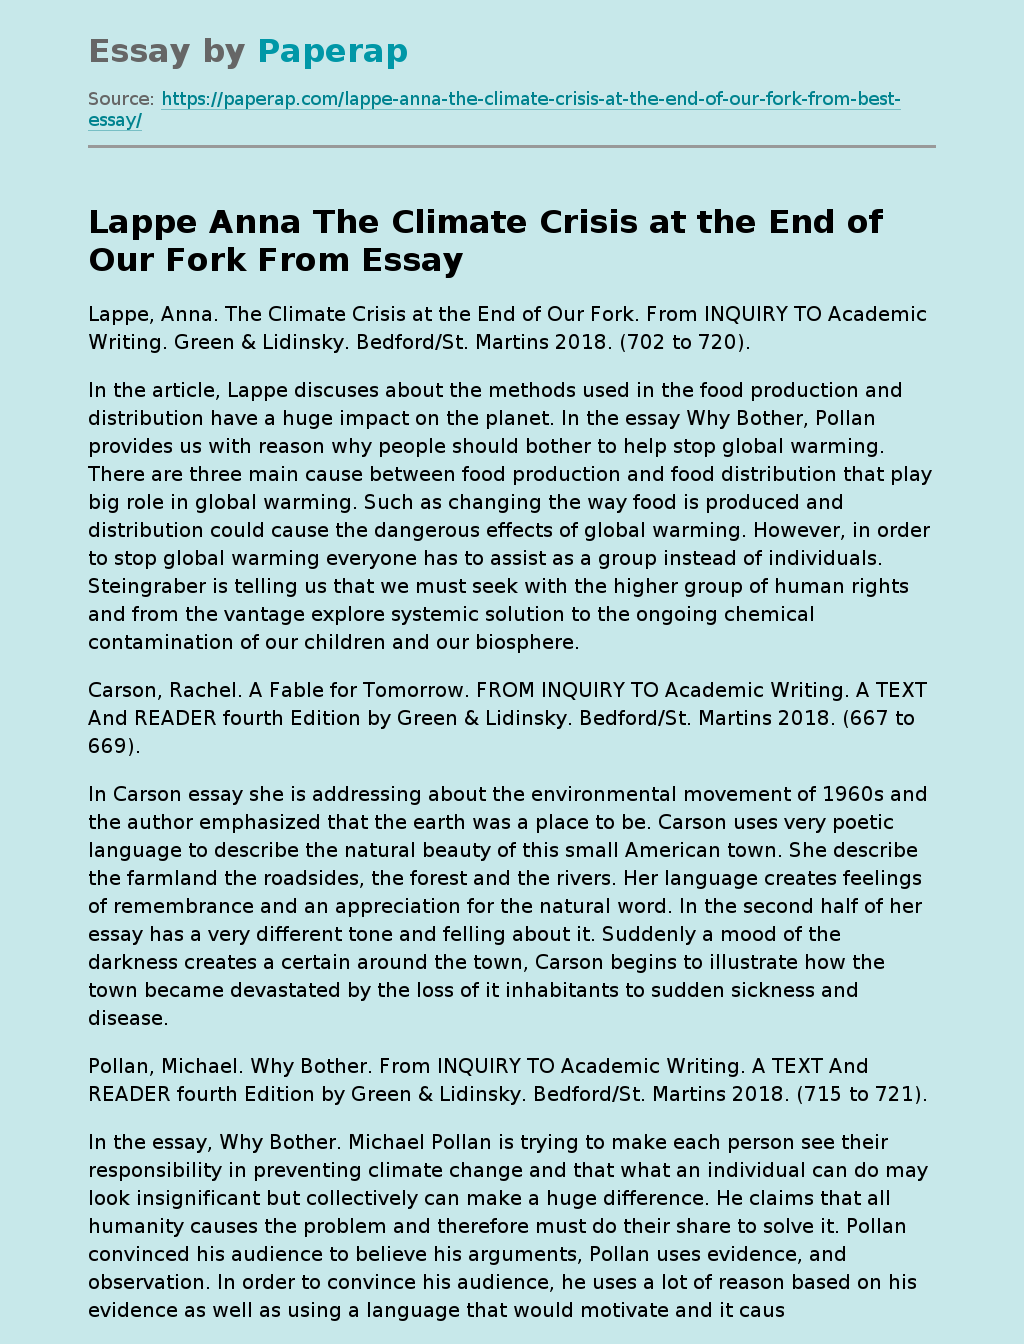 Lappe Anna The Climate Crisis at the End of Our Fork From